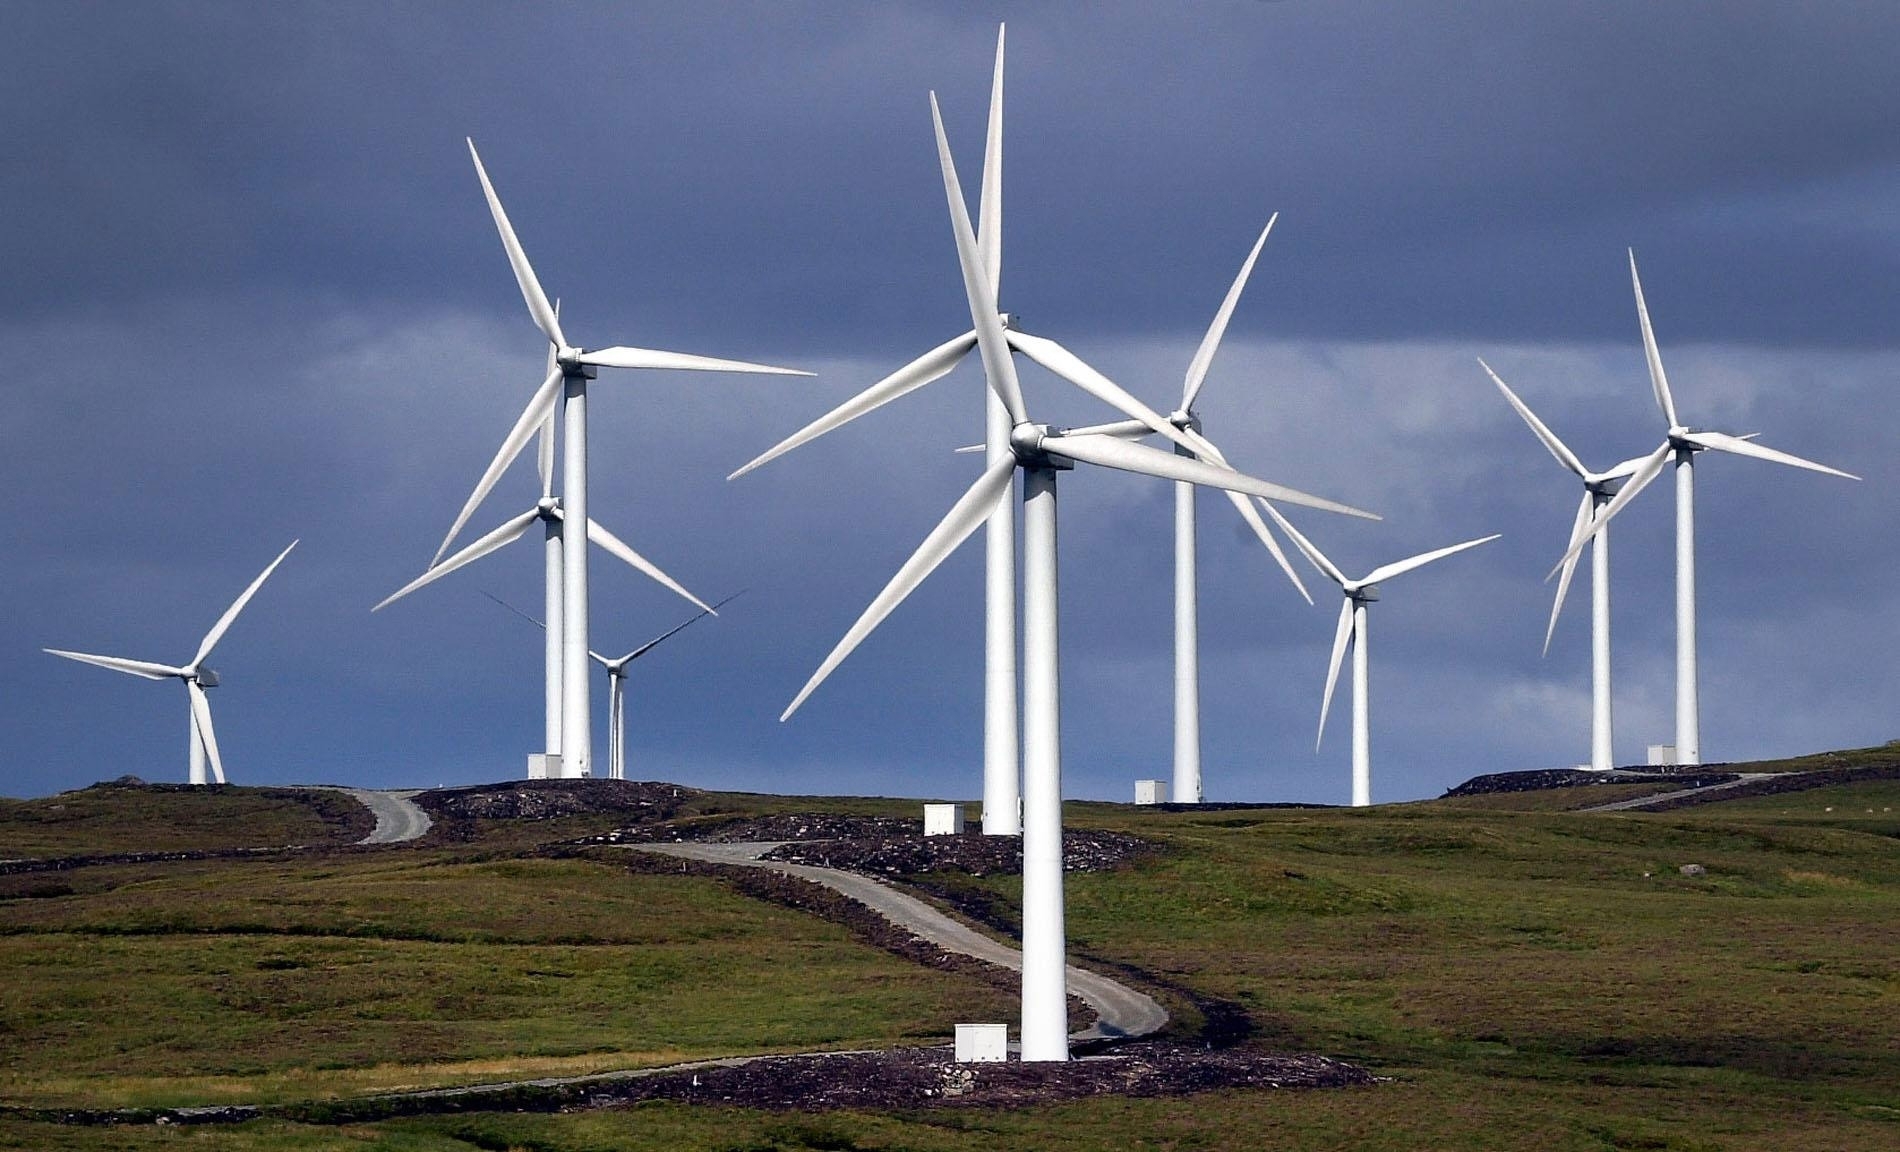 Are wind farms the future or a massive waste of our resources?